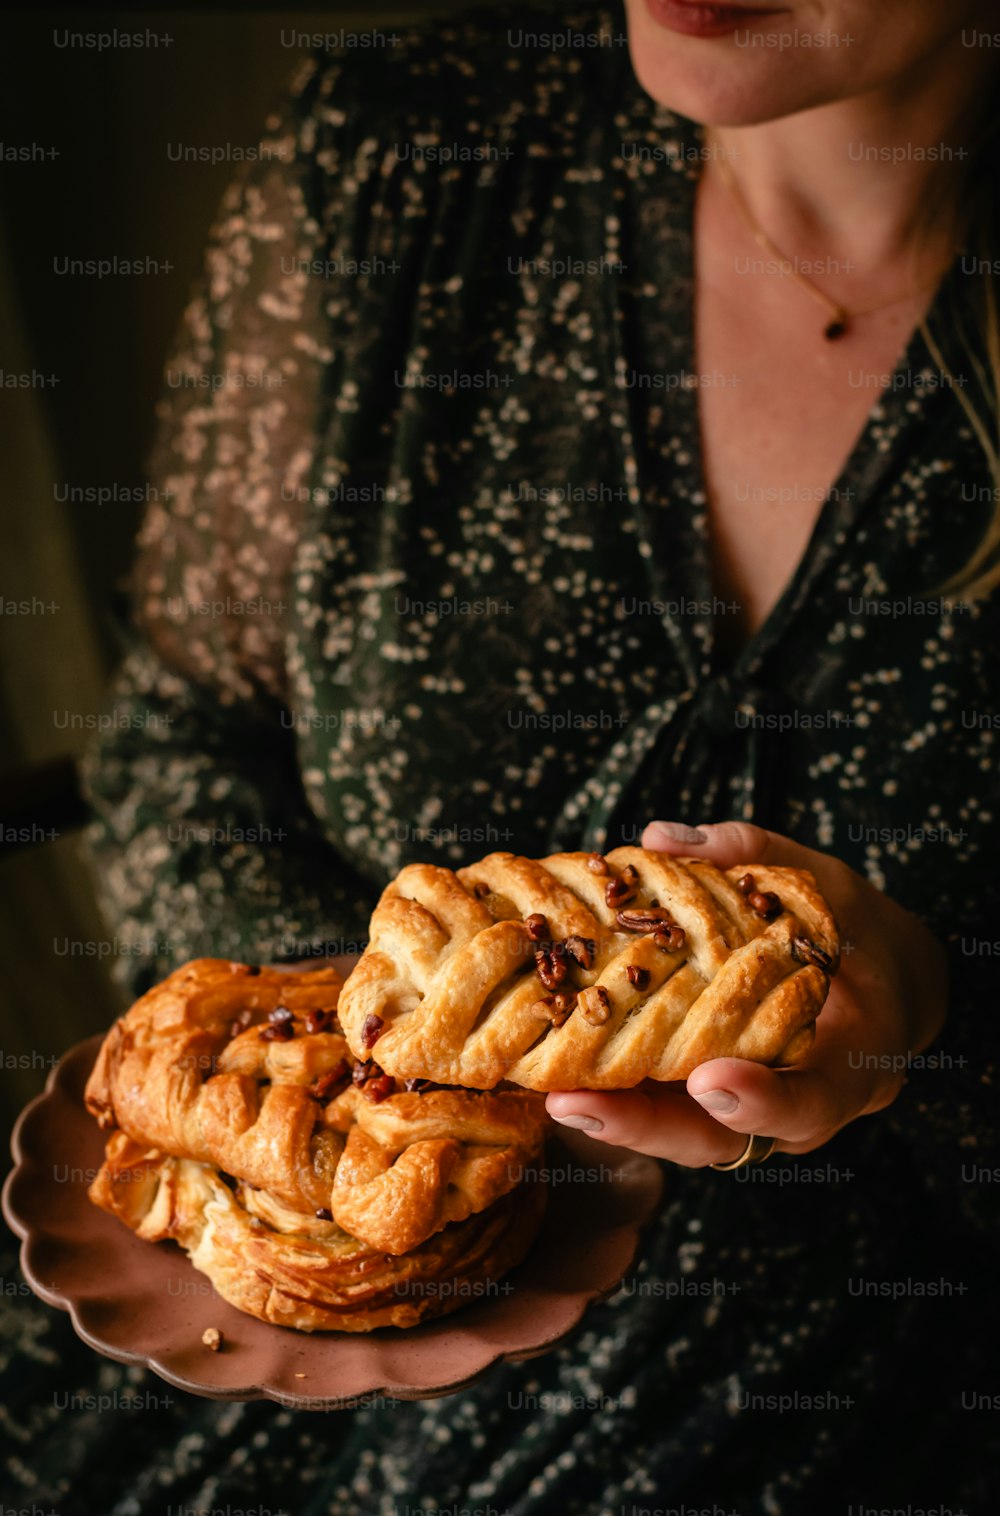 a woman holding a plate of food in her hands